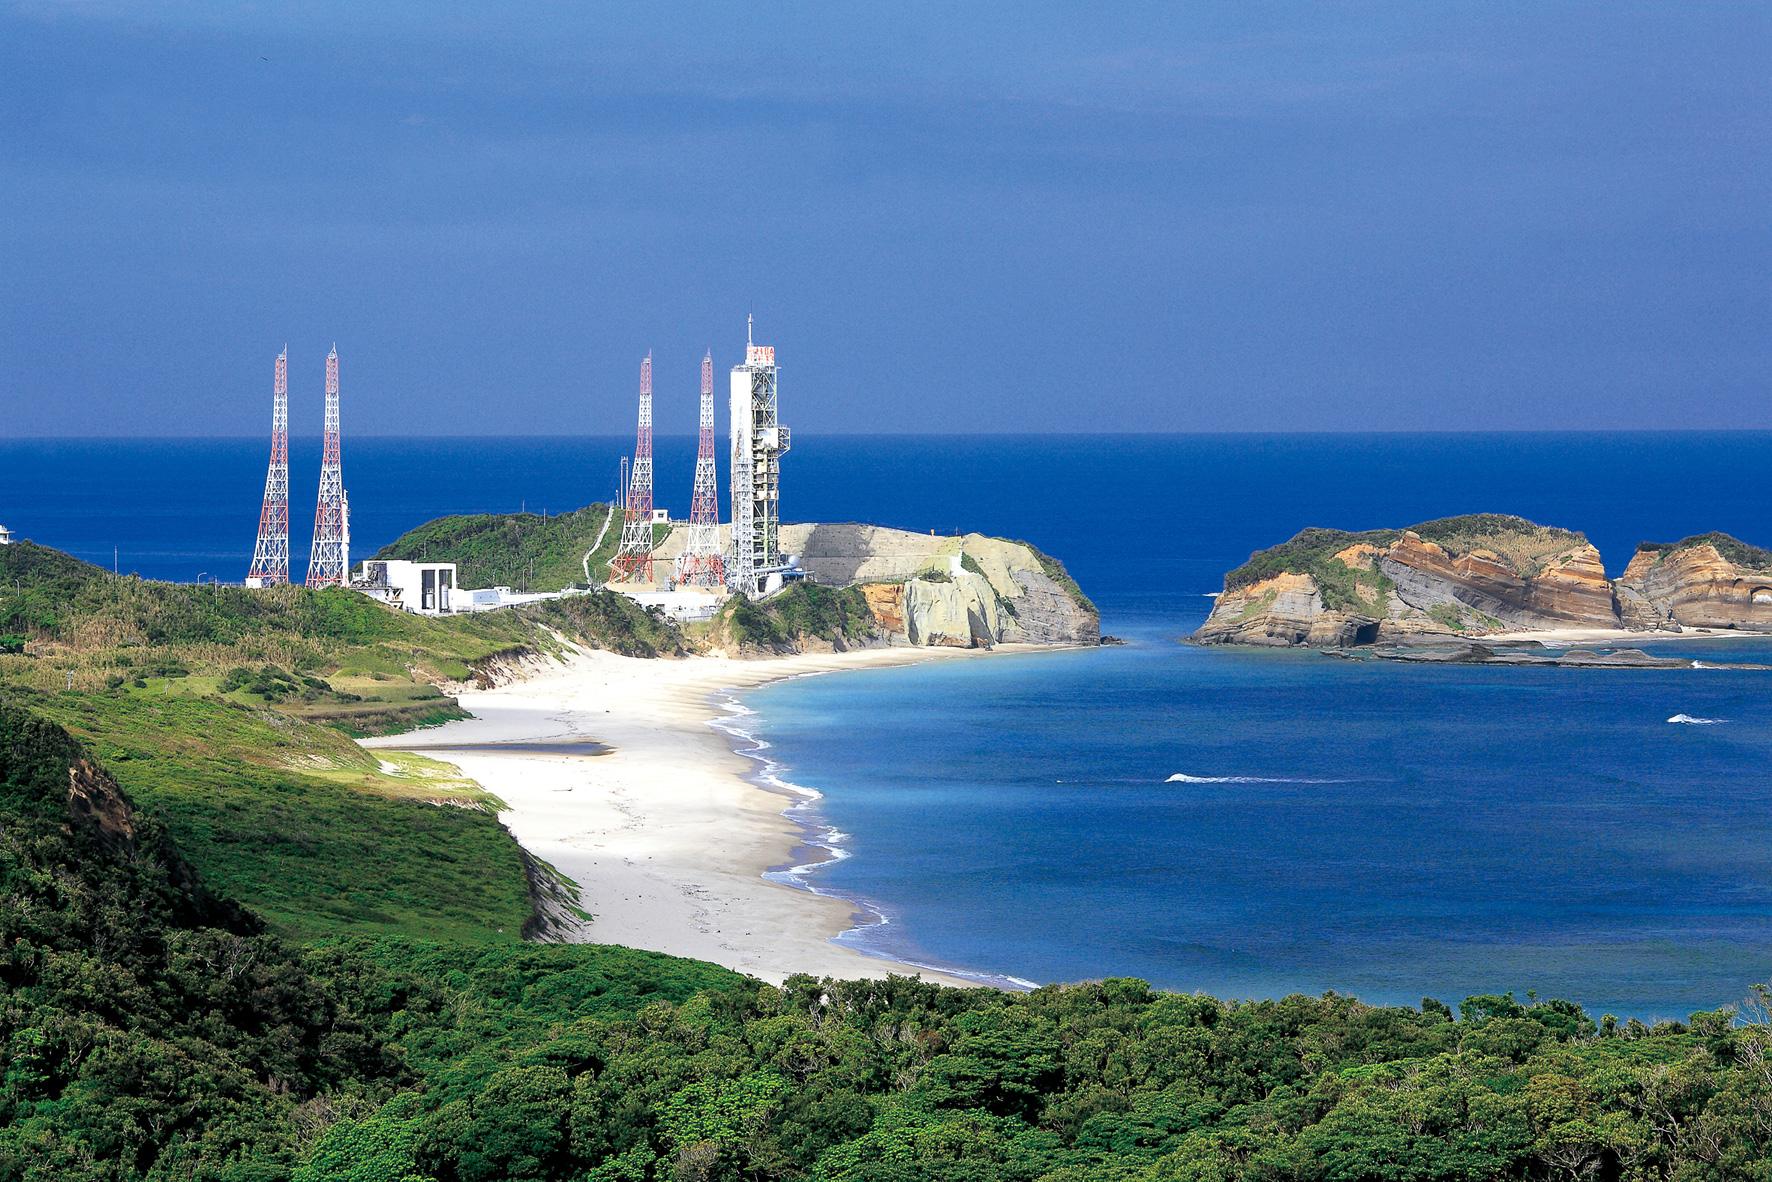 Space up close: the Tanegashima Route-0